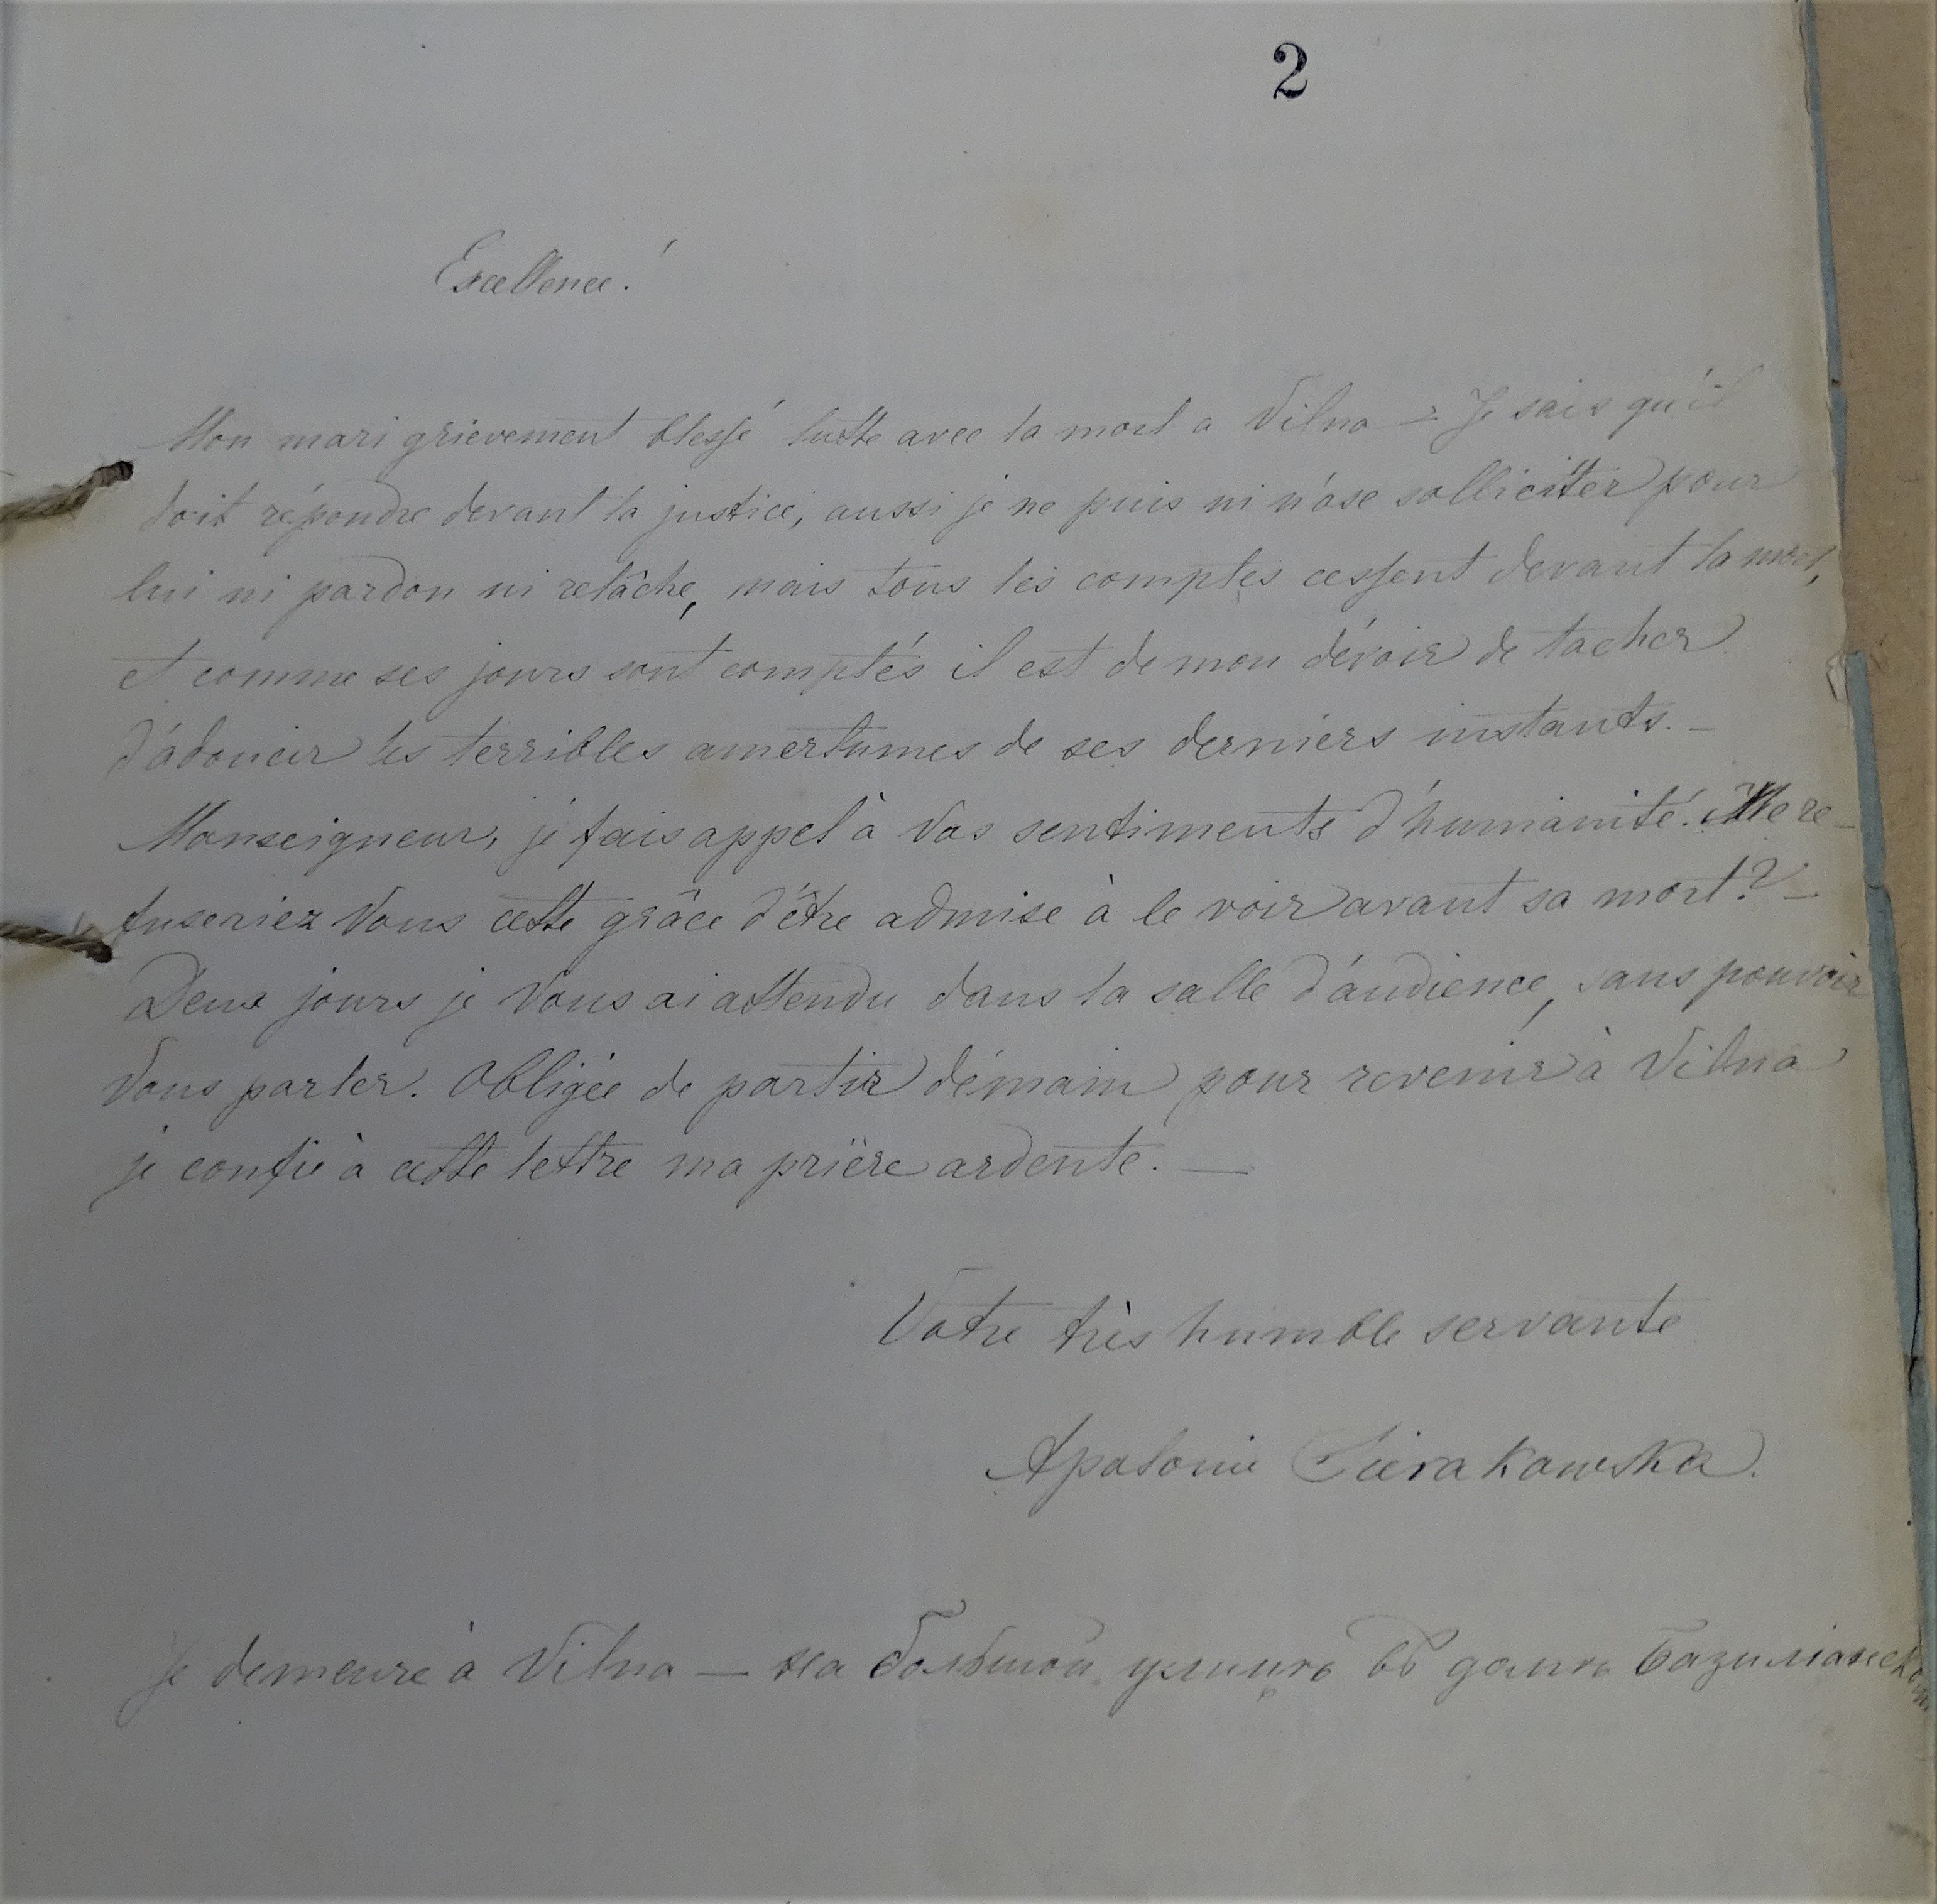 Apollonia's letter to Emperor Alexander II, in which she asks for permission to see her imprisoned husband Z. Sierakauskas